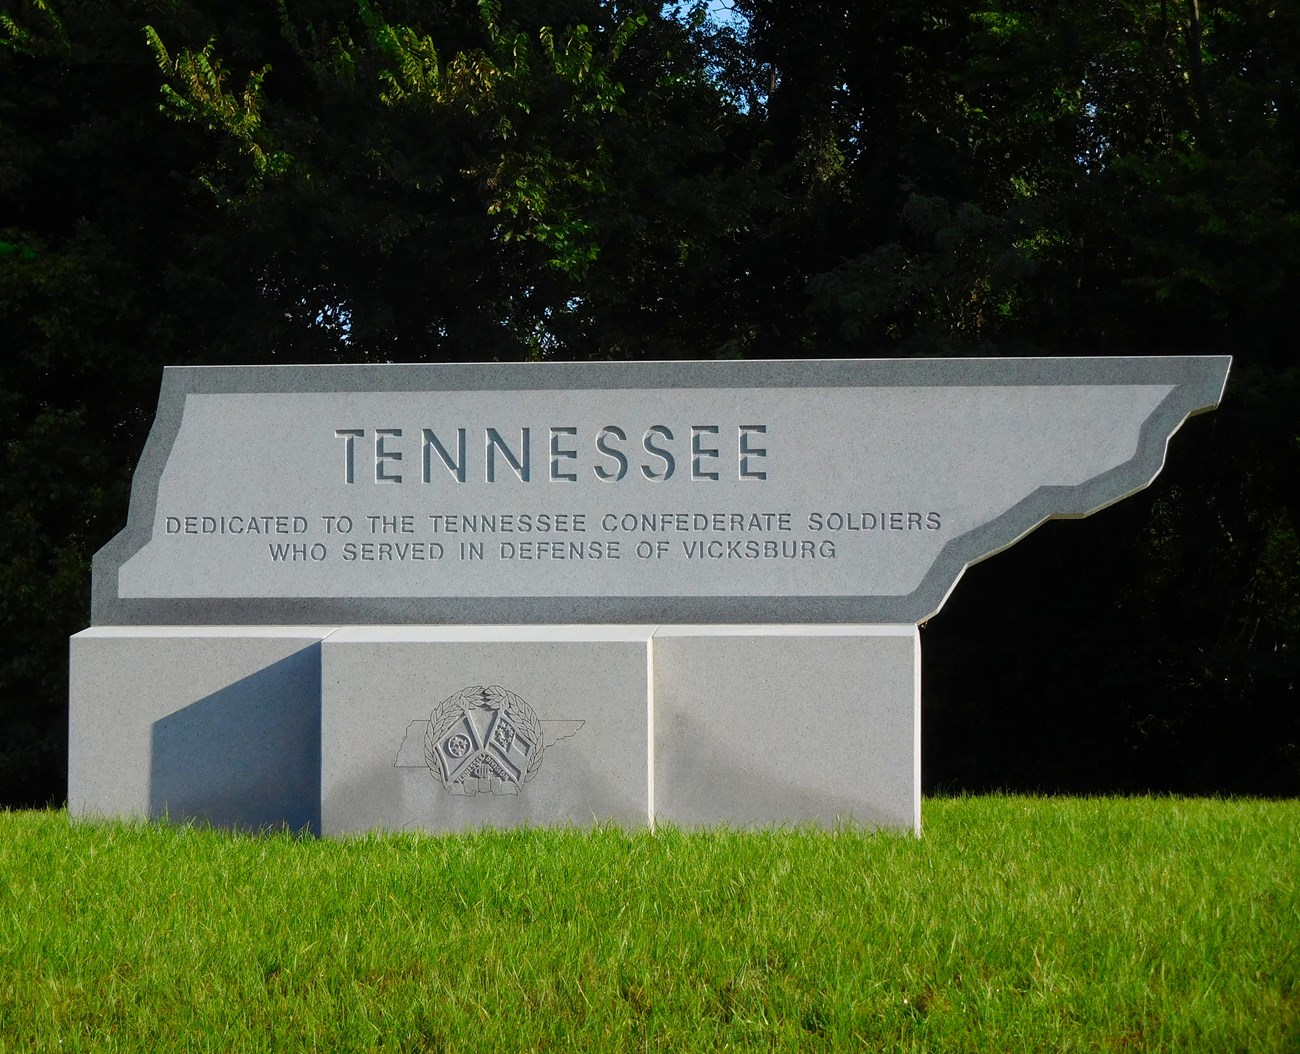 A granite memorial in the shape of the state of Tennessee In the middle of the inscription.